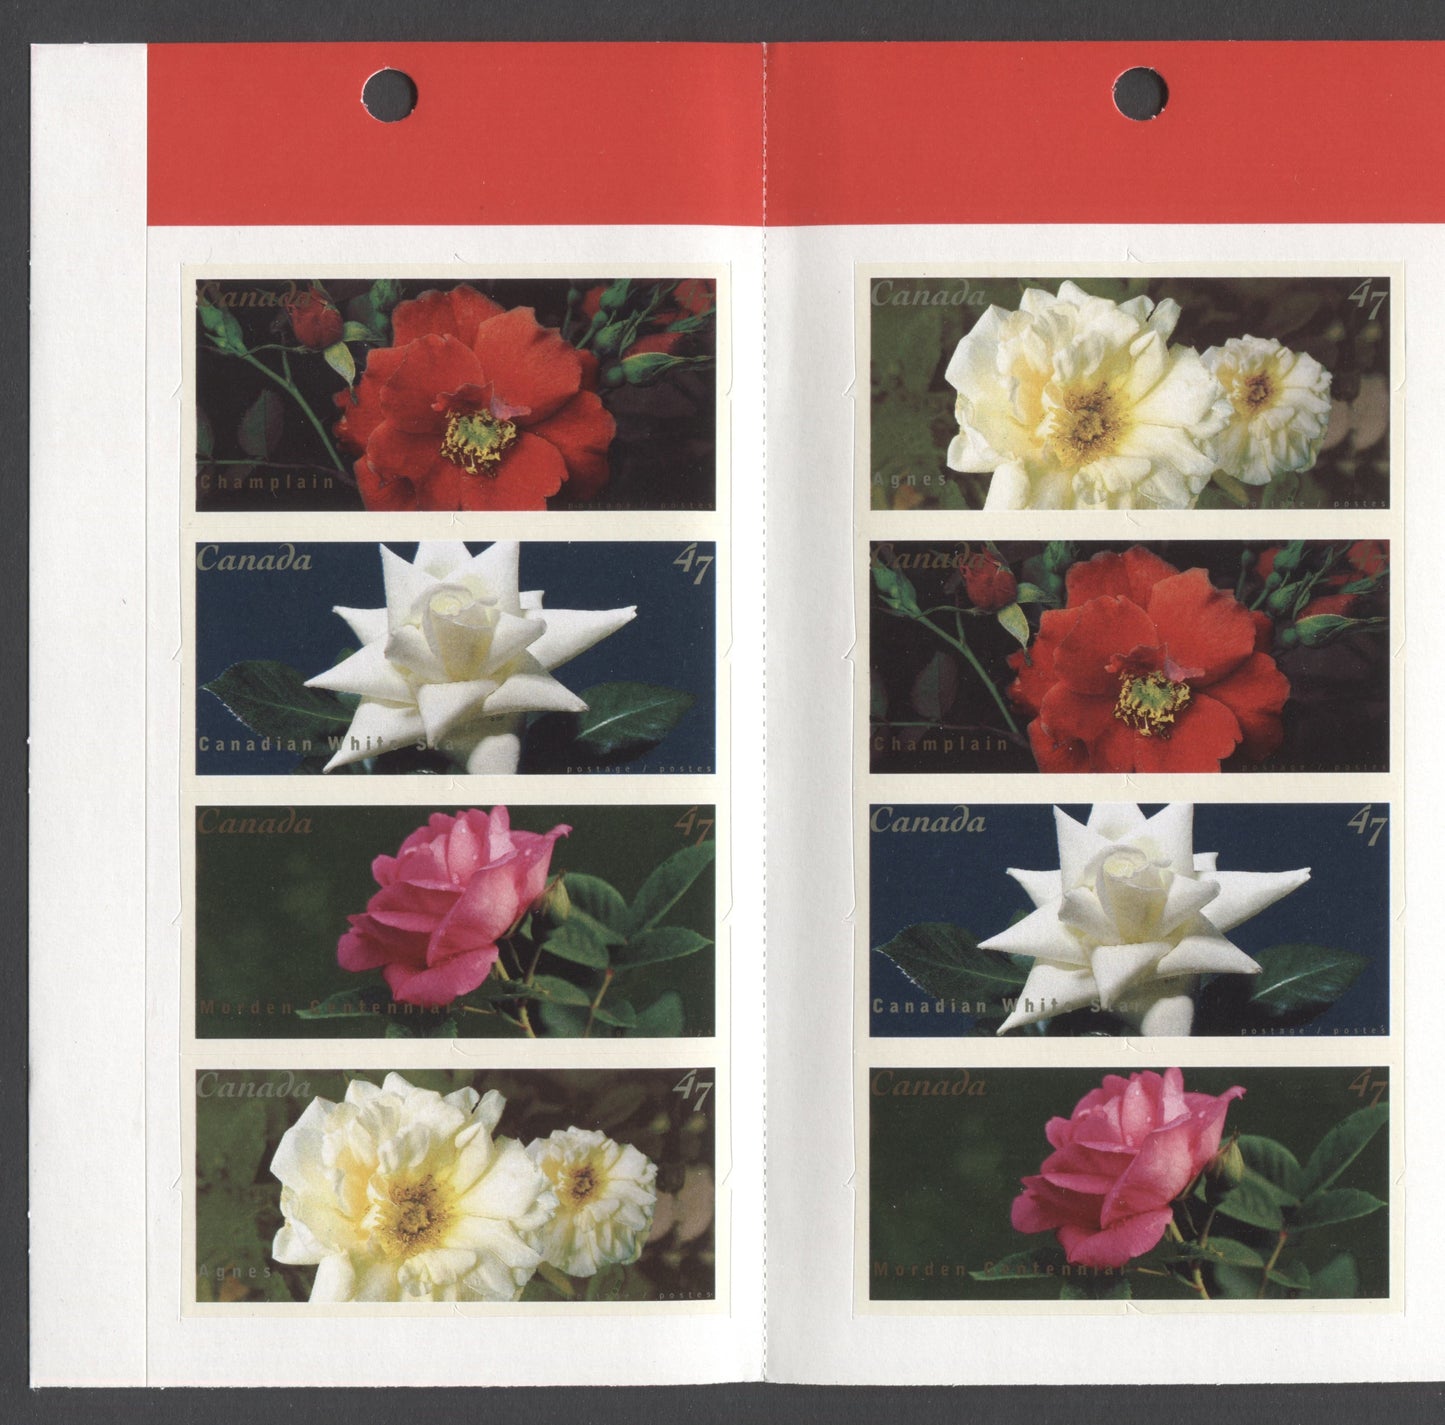 Canada #BK245a-b 2001 Roses Issue, Complete $5.64 Booklet, JAC Paper, Dead Paper, 4 mm GT-4 Tagging